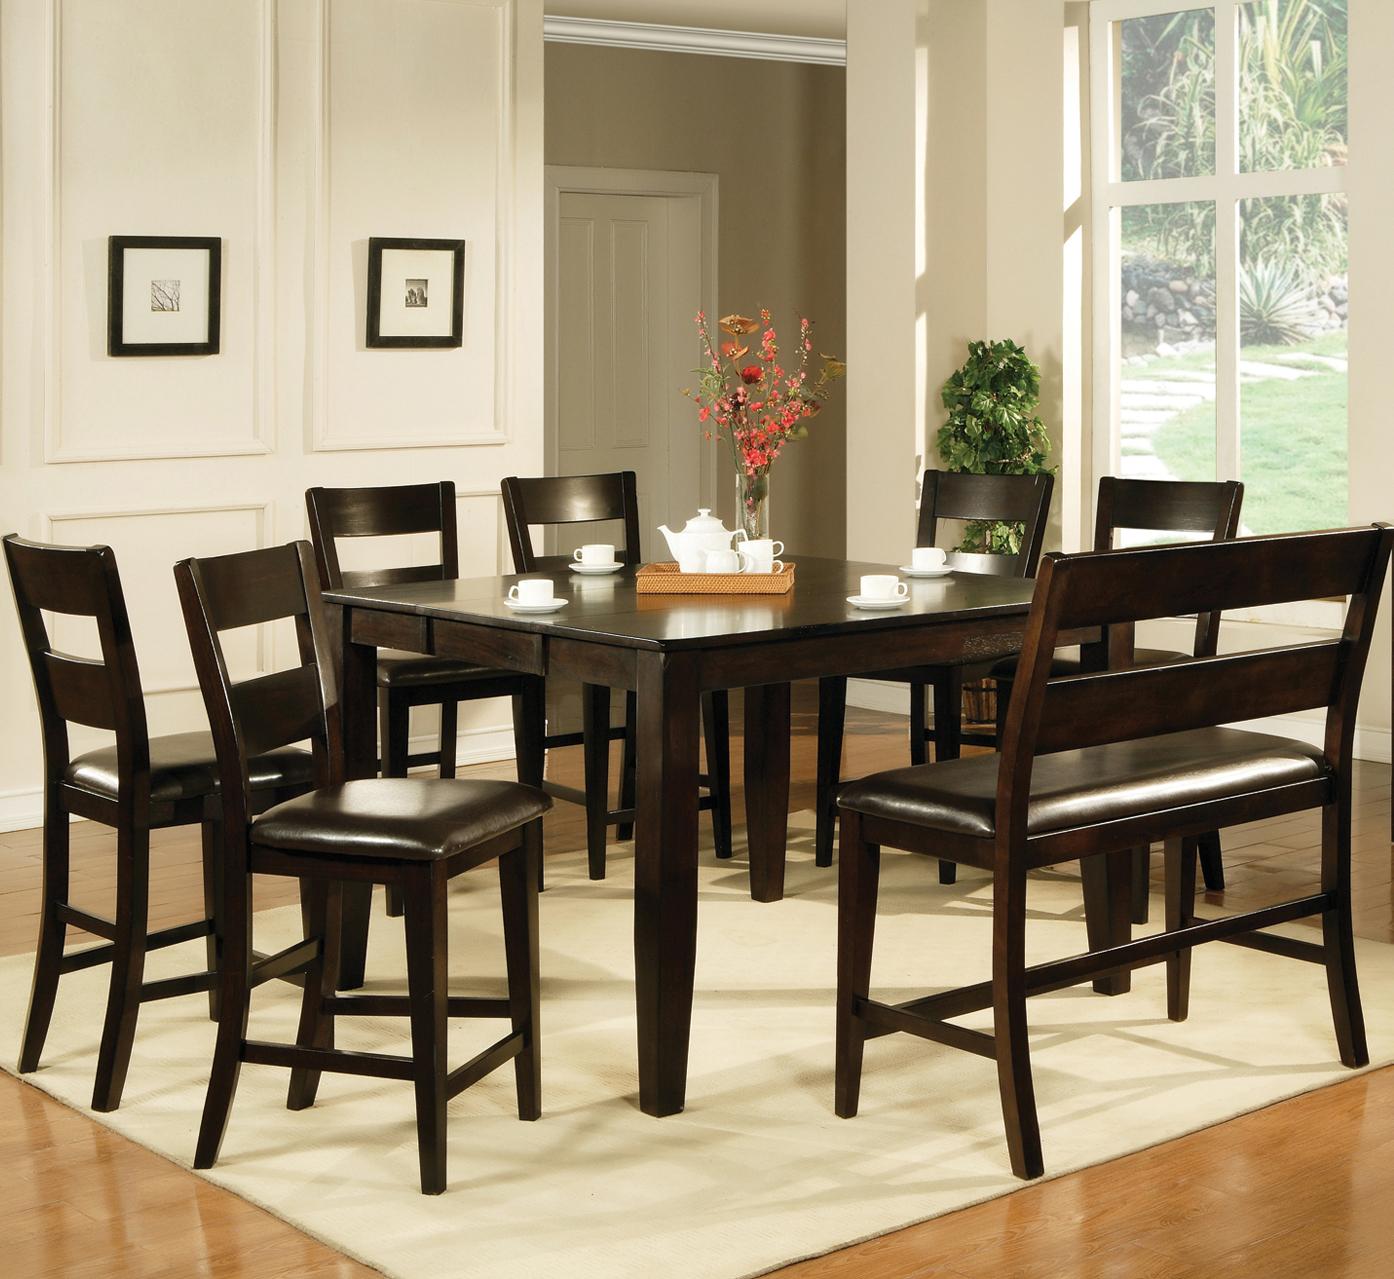 Counter Height Dining Set includes 4 Chairs *Bench Sold Separately